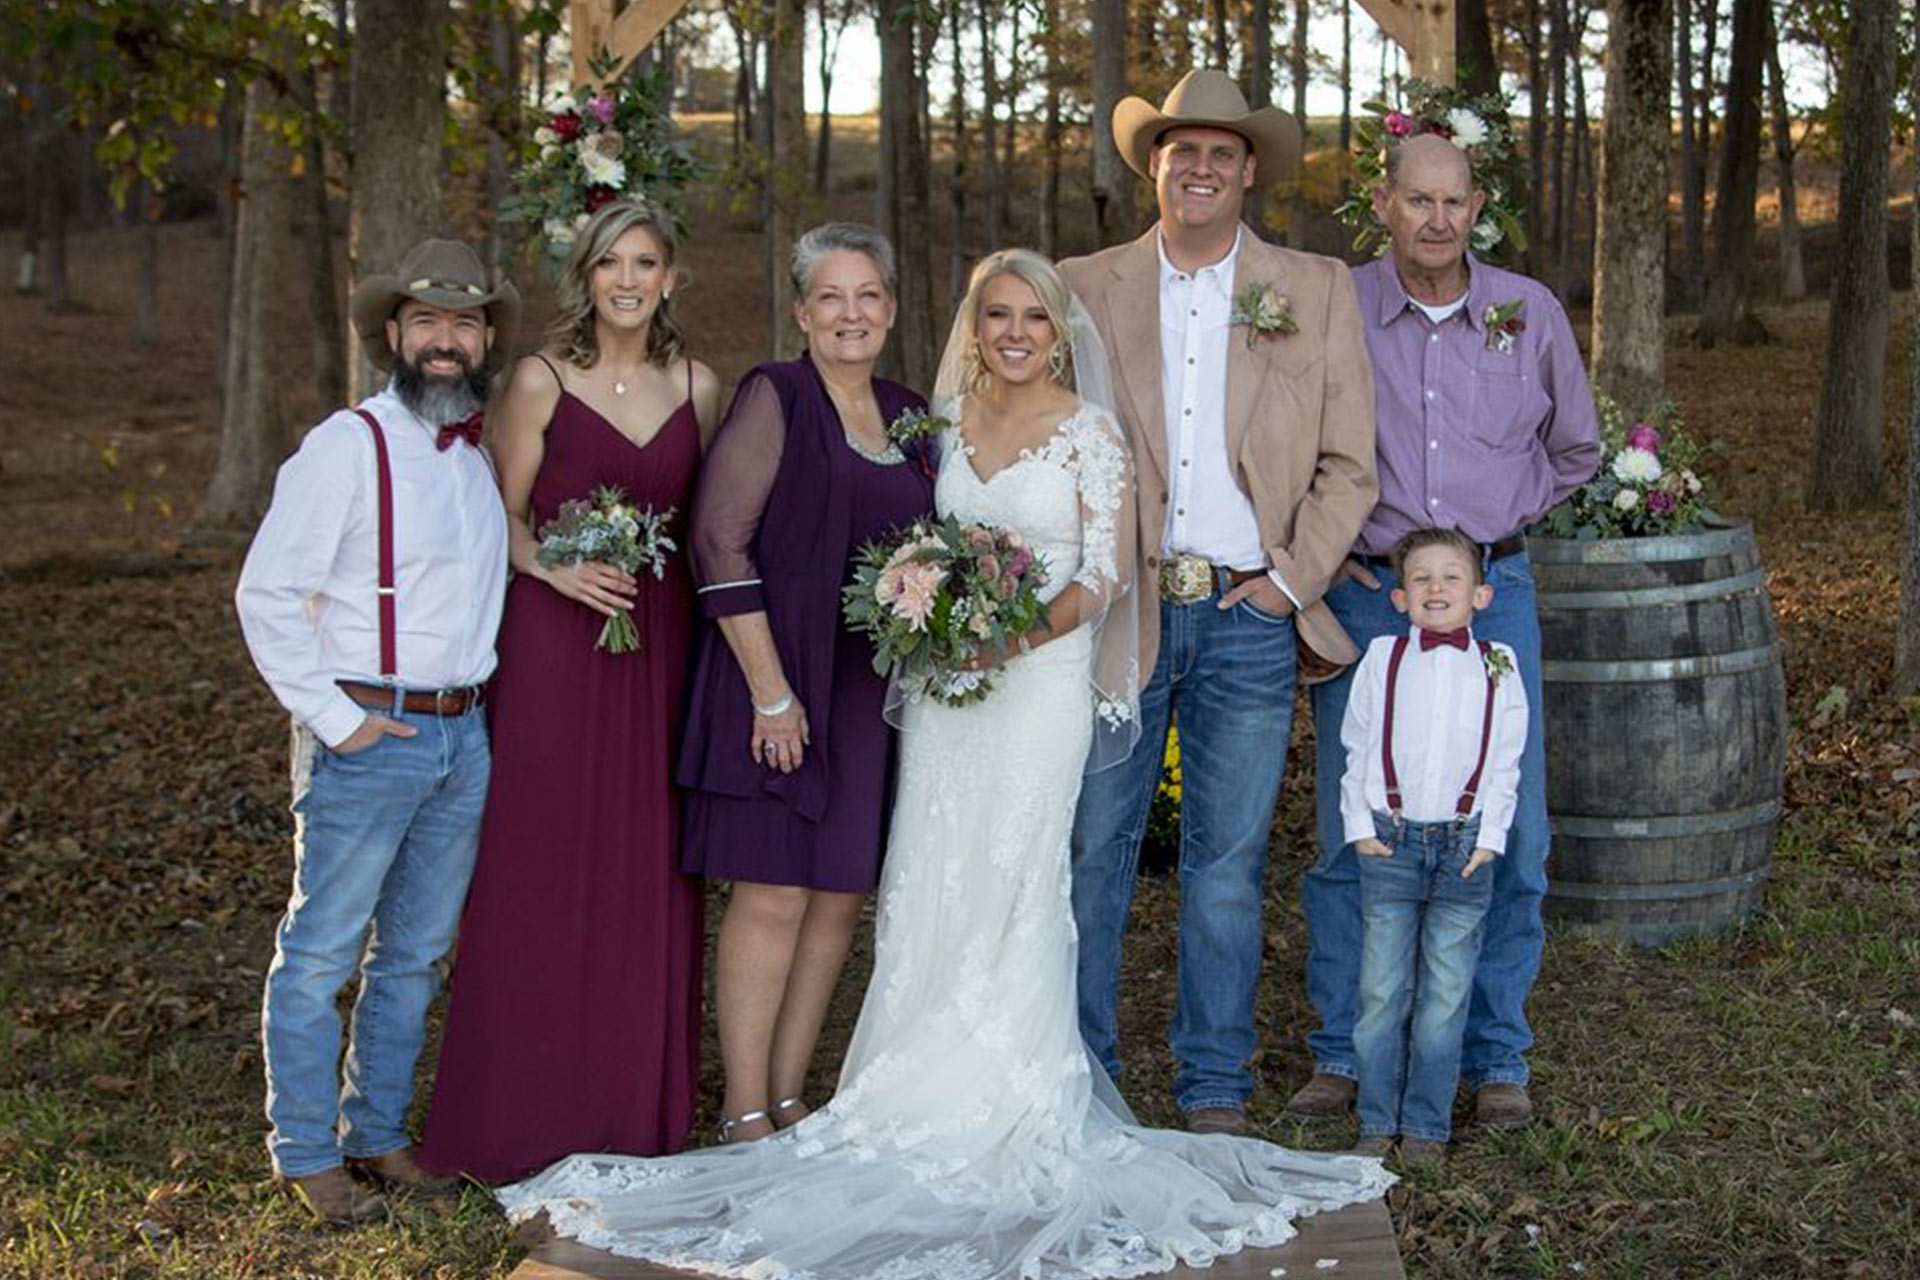 Outdoor Country Wedding Venue In Southern Illinois Samsons Mountain Whitetail Deer